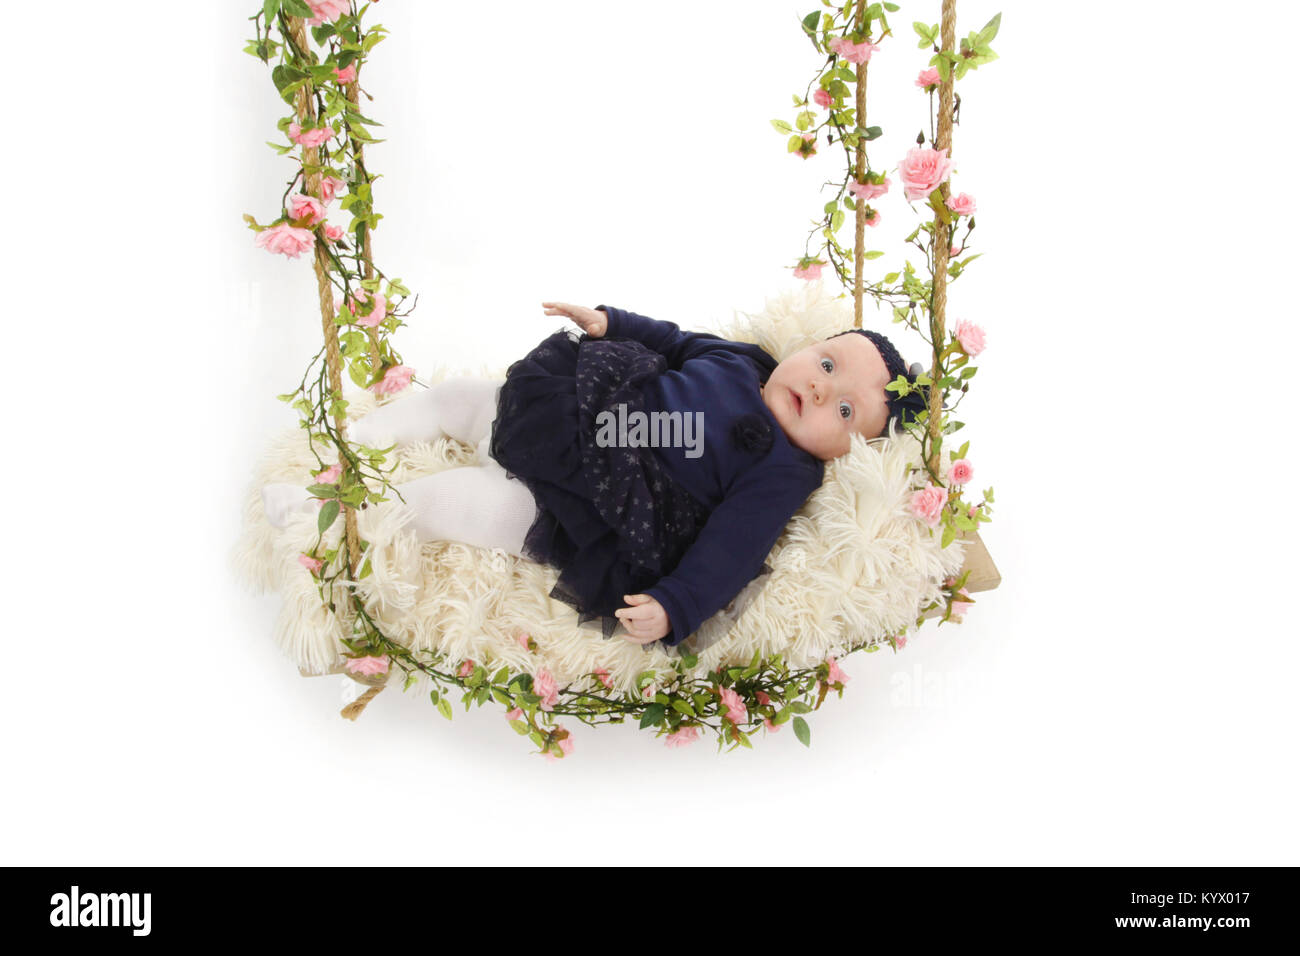 5 month old baby girl with in black dress laying on a swing Stock Photo